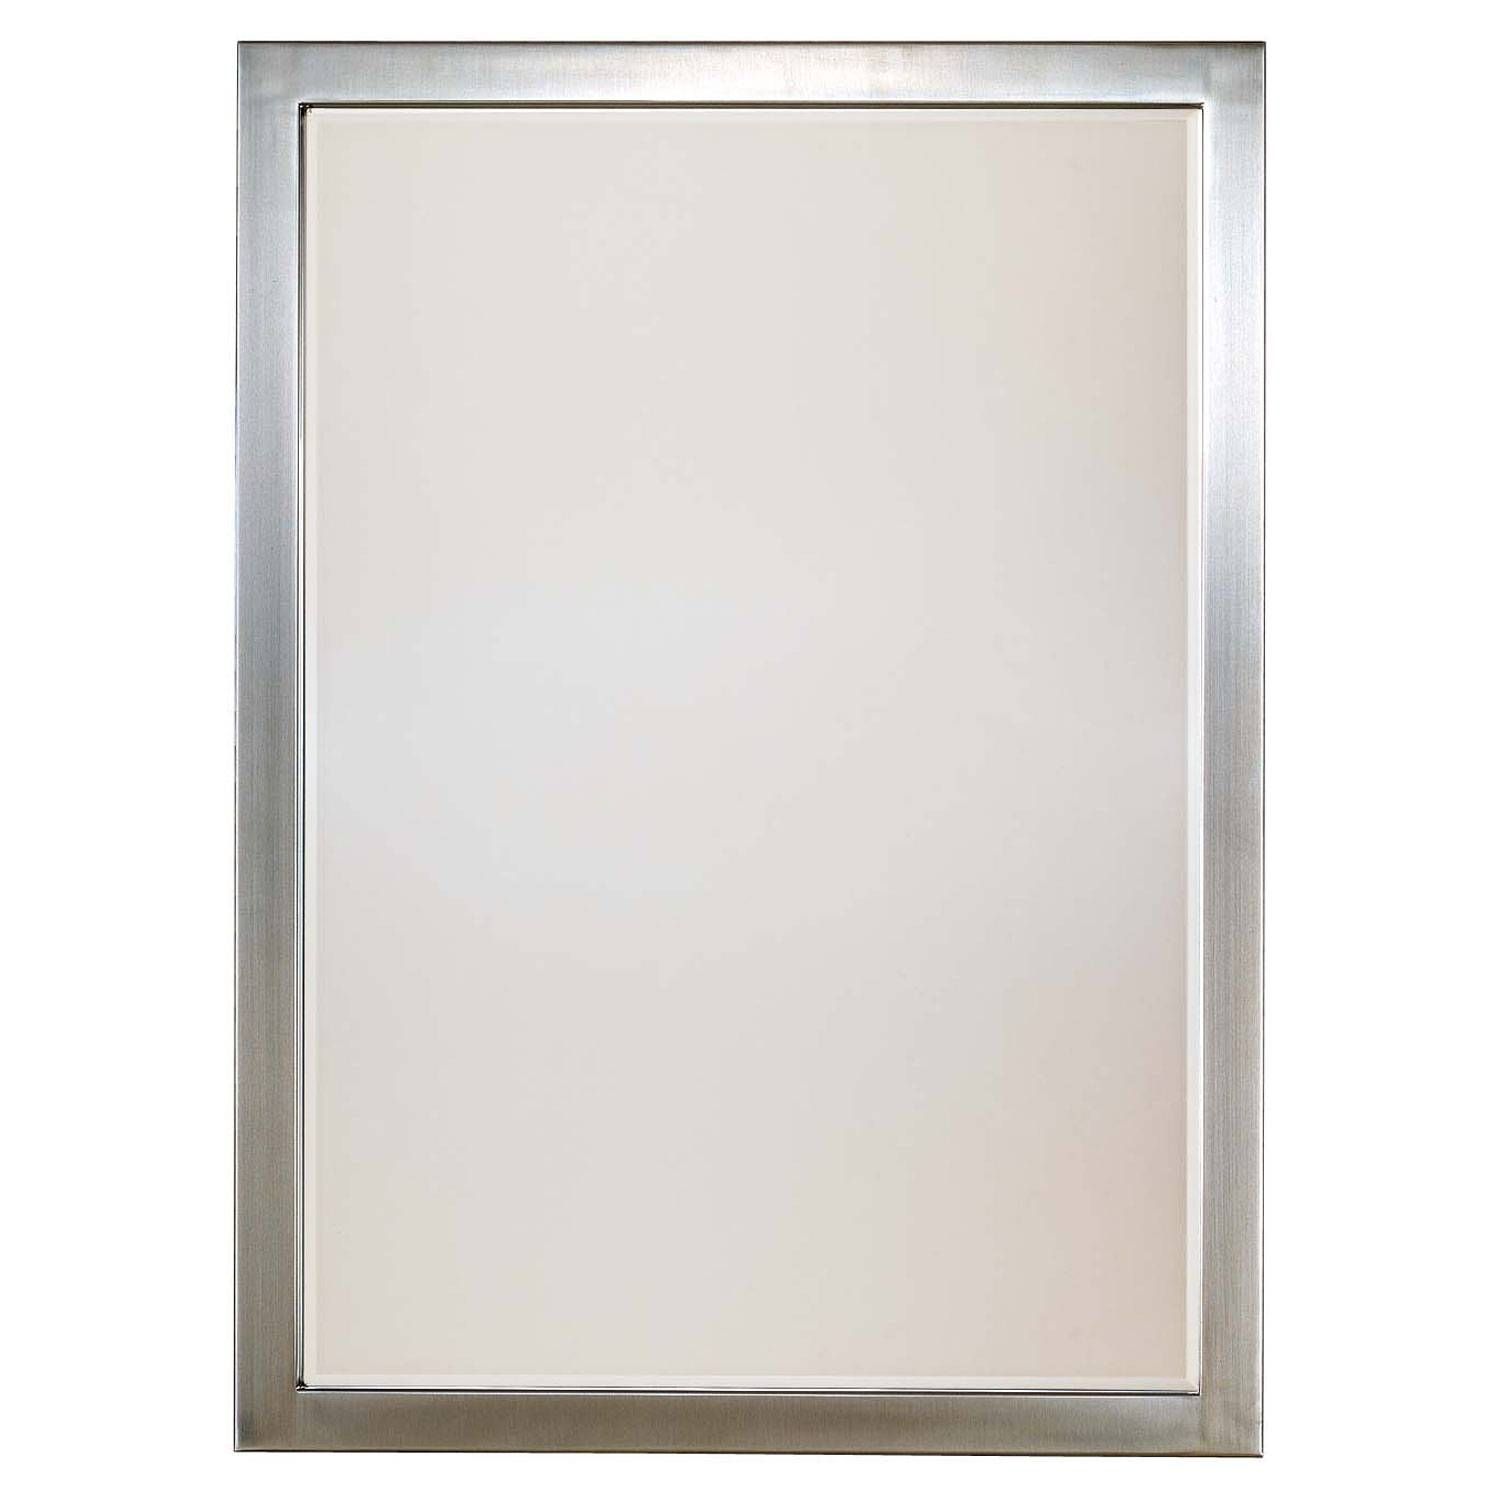 Wall Mirrors, Bathroom Mirrors | Bellacor With Regard To Mirrors Without Frames (View 25 of 25)